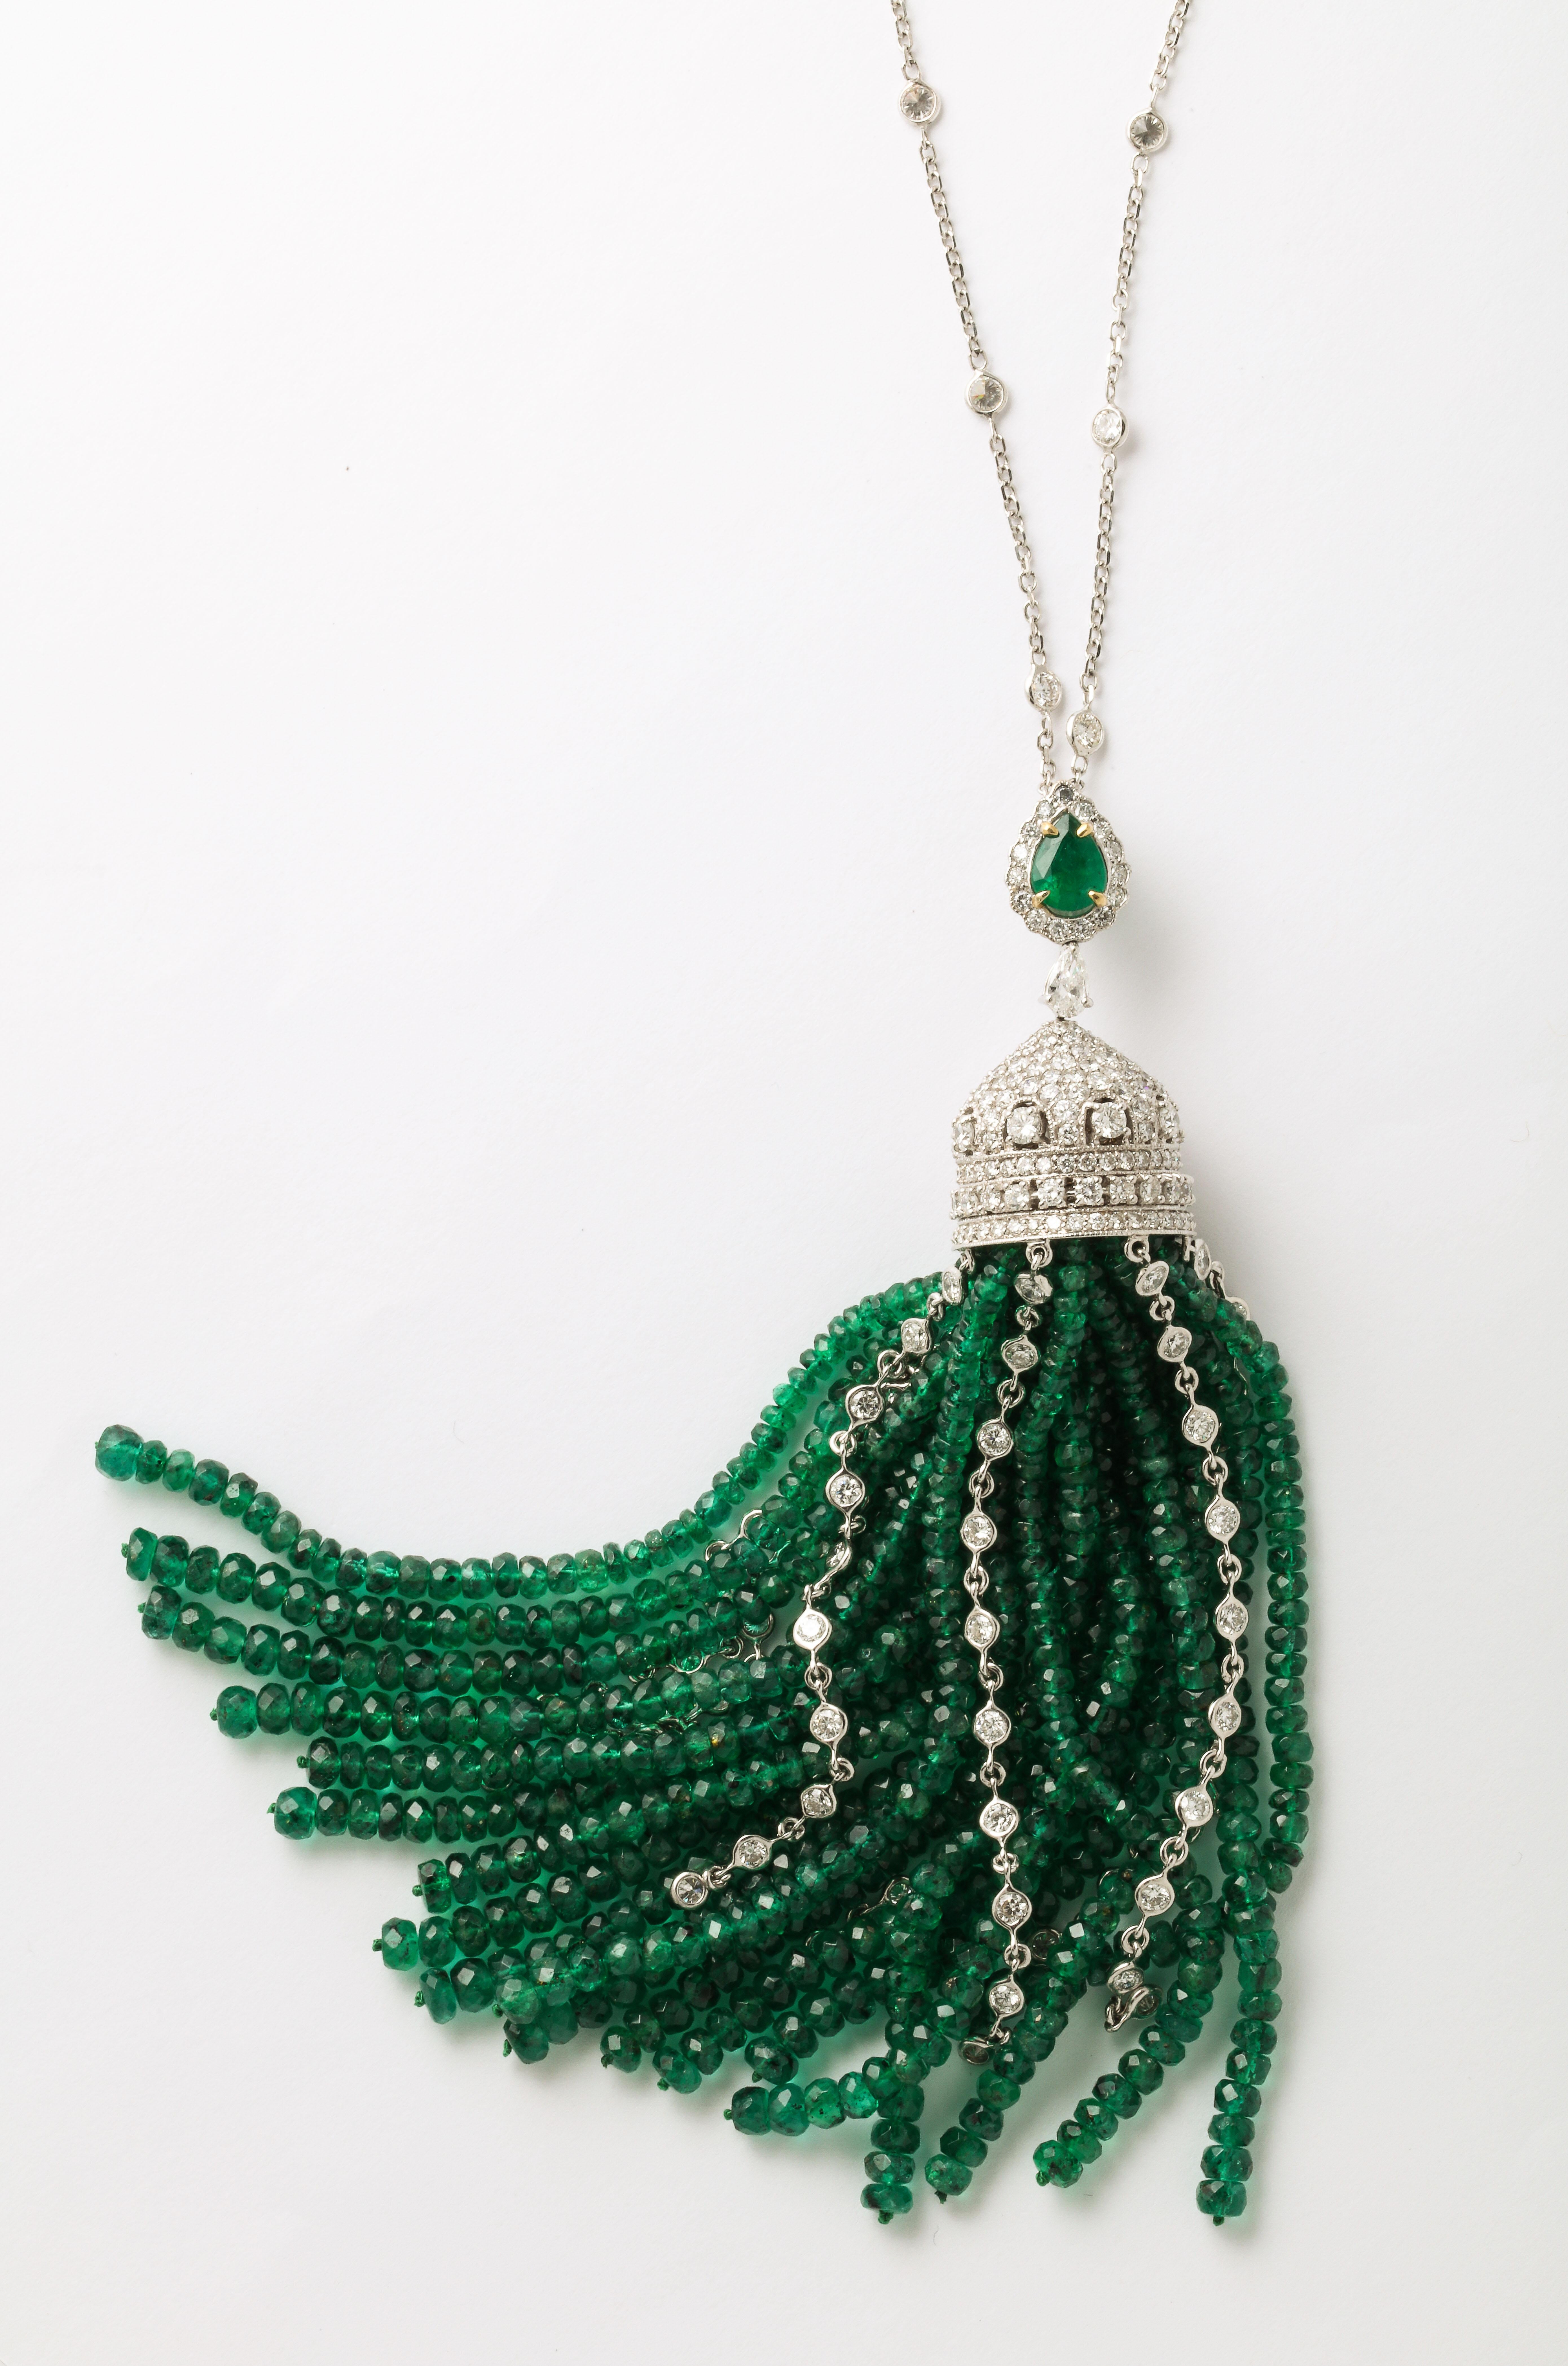 An important Emerald and Diamond Tassel Necklace

151 carats of fine Emerald and 12.54 carats of white round brilliant diamonds. 

30 inch removable diamond by yard chain, set in white gold. The tassel measures approximately 4.75 inches in length.